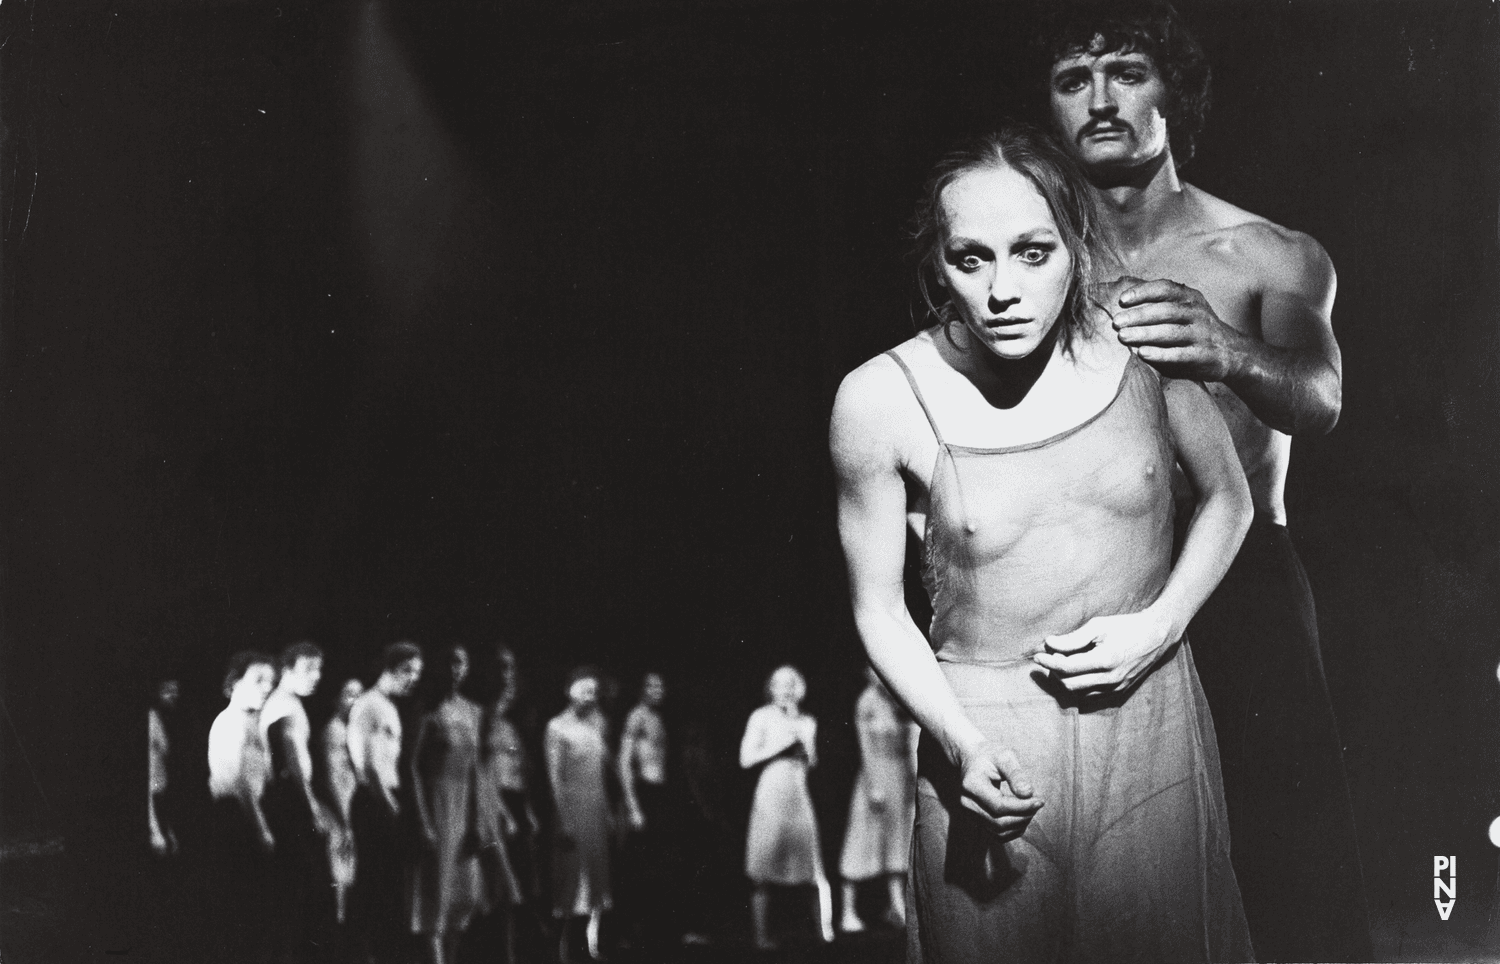 Marlis Alt and Jan Minařík in “The Rite of Spring” by Pina Bausch